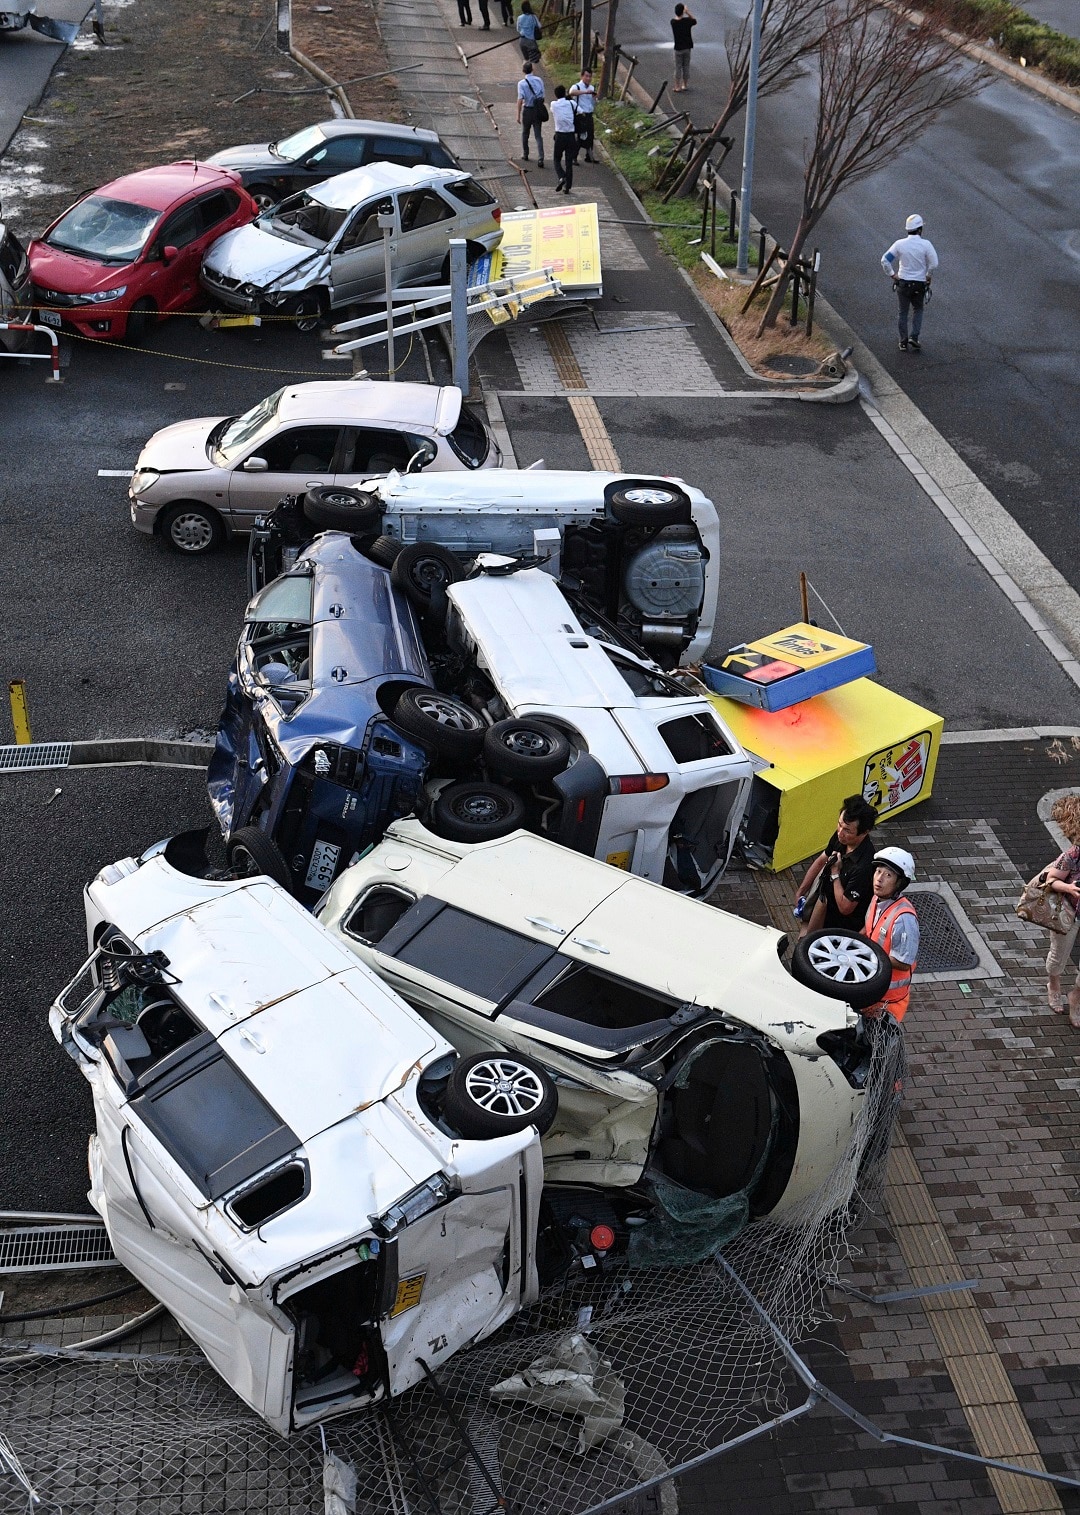 Vehicles were overturned by strong winds. 